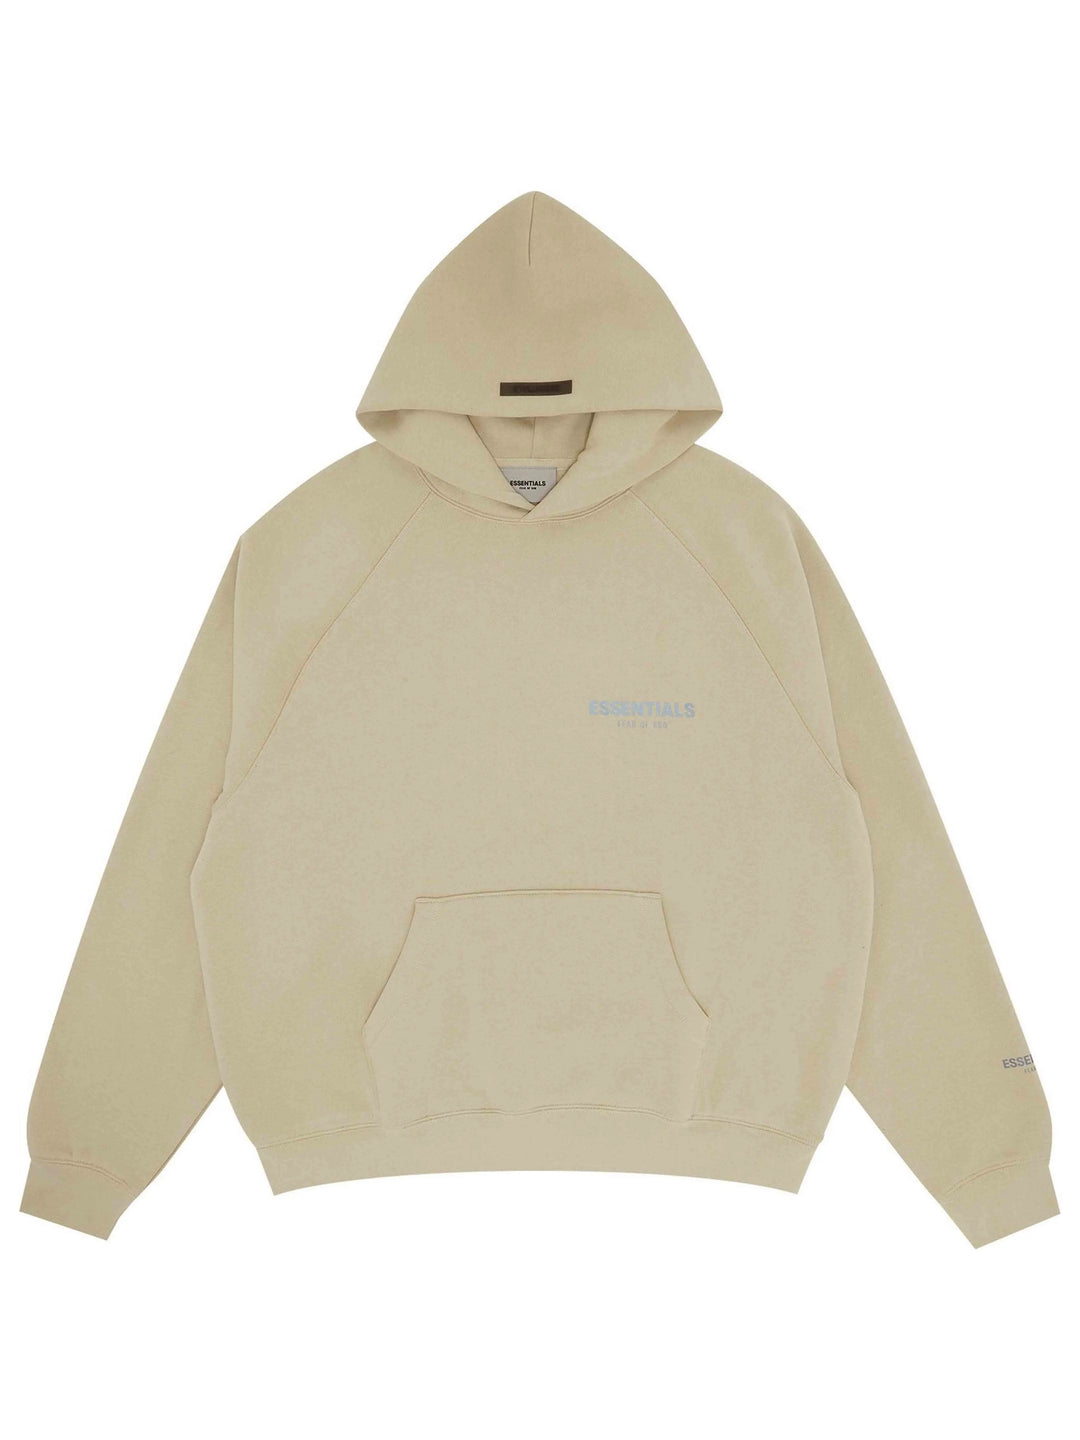 Fear of God Essentials x SSENSE Exclusive Pullover Hoodie Linen Prior